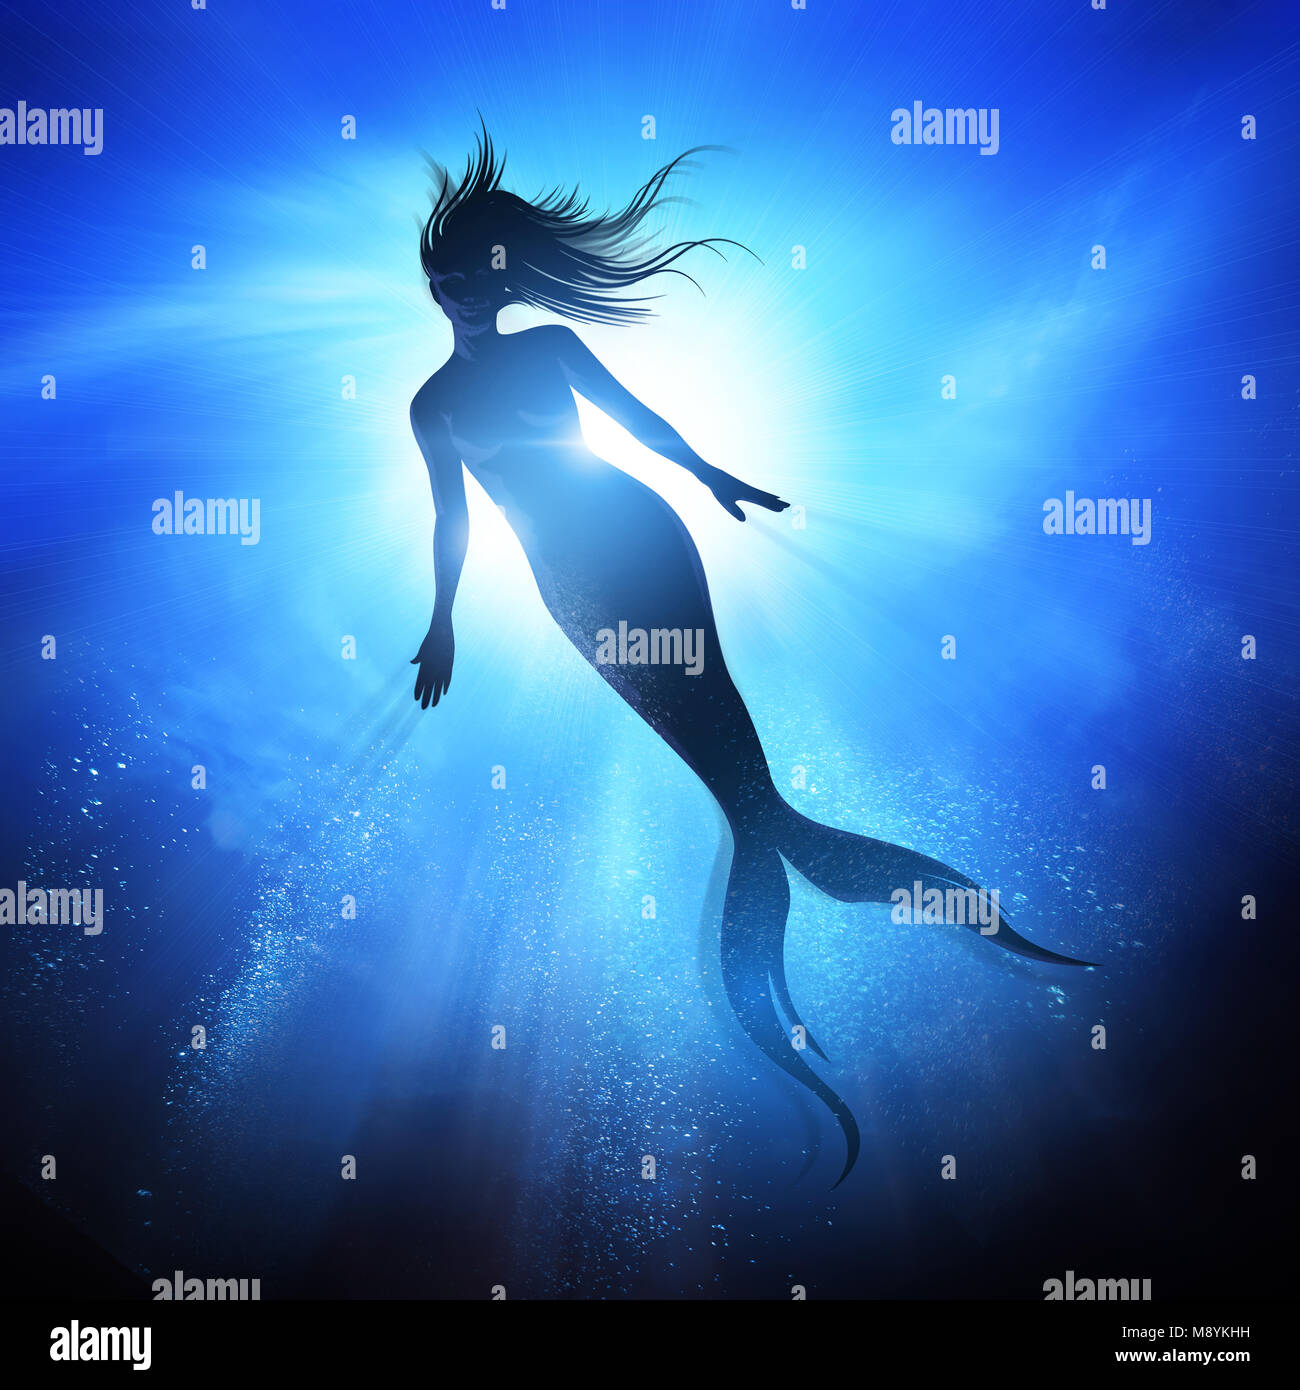 A swimming Mermaid silhouette with a long fish tail in the deep blue sea. Mythical creature of the ocean. Mixed media illustration Stock Photo